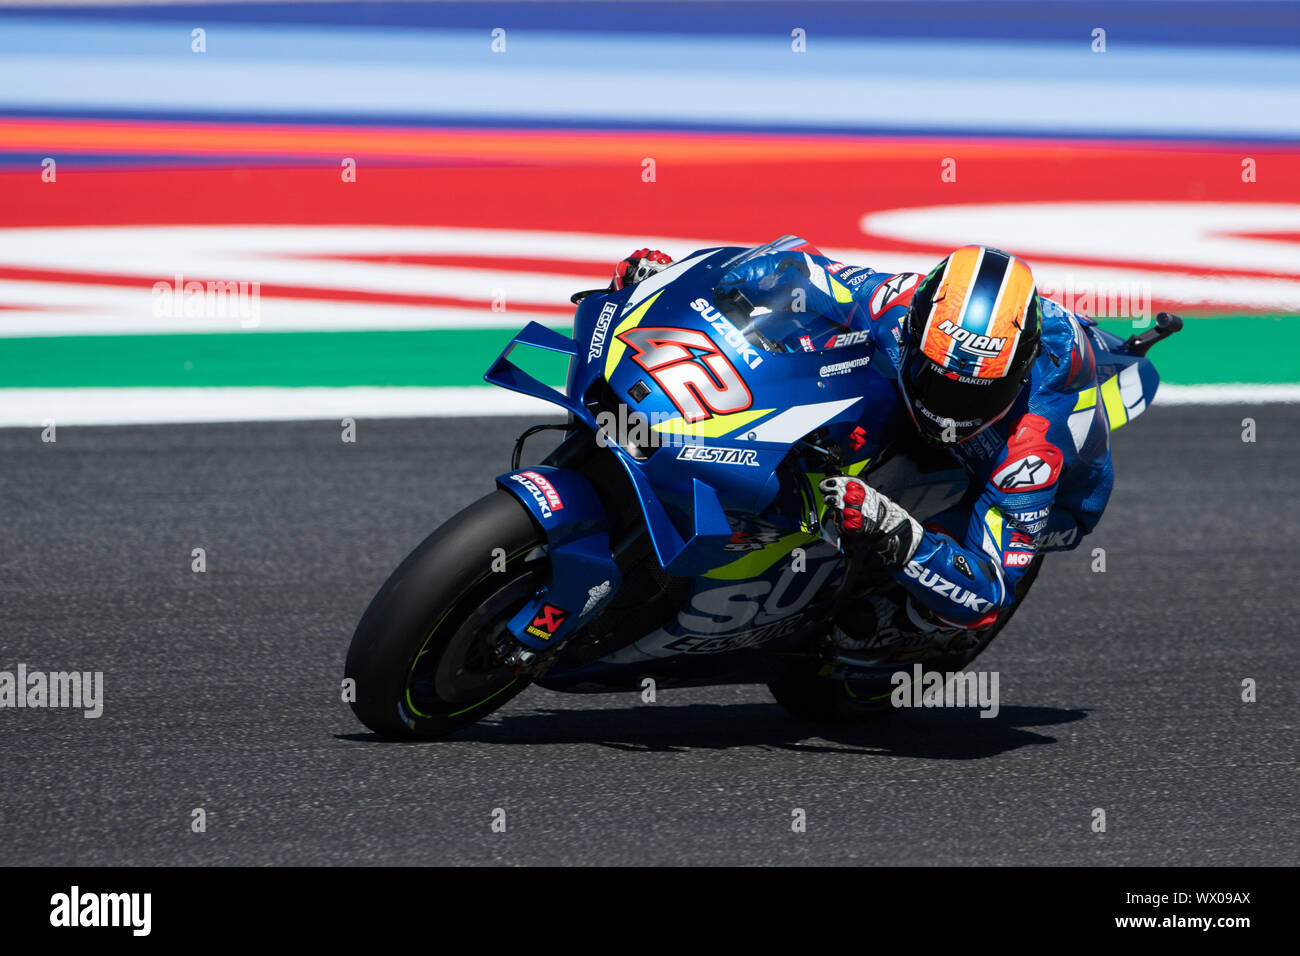 ALEX RINS, SPANISH RIDER NUMBER 42 FOR SUZUKI TEAM IN MOTOGP during Friday  Free Practice (fp1-fp2) Of The Motogp Of San Marino And Riviera Of Rimini  Stock Photo - Alamy